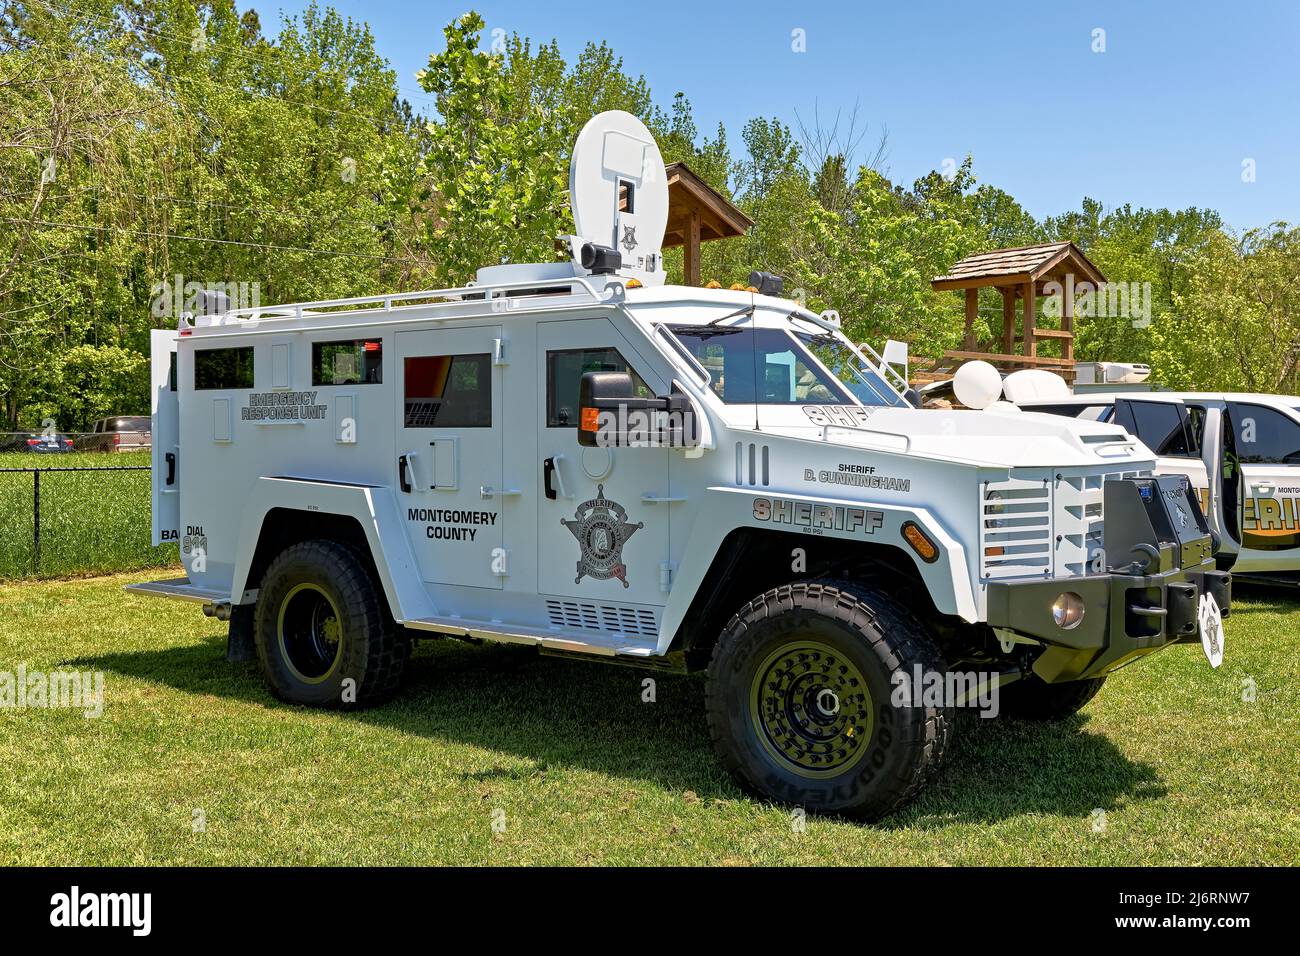 Armored SWAT or emergency services tactical unit police or law enforcement vehicle known as a bearcat on display in Montgomery Alabama. Stock Photo